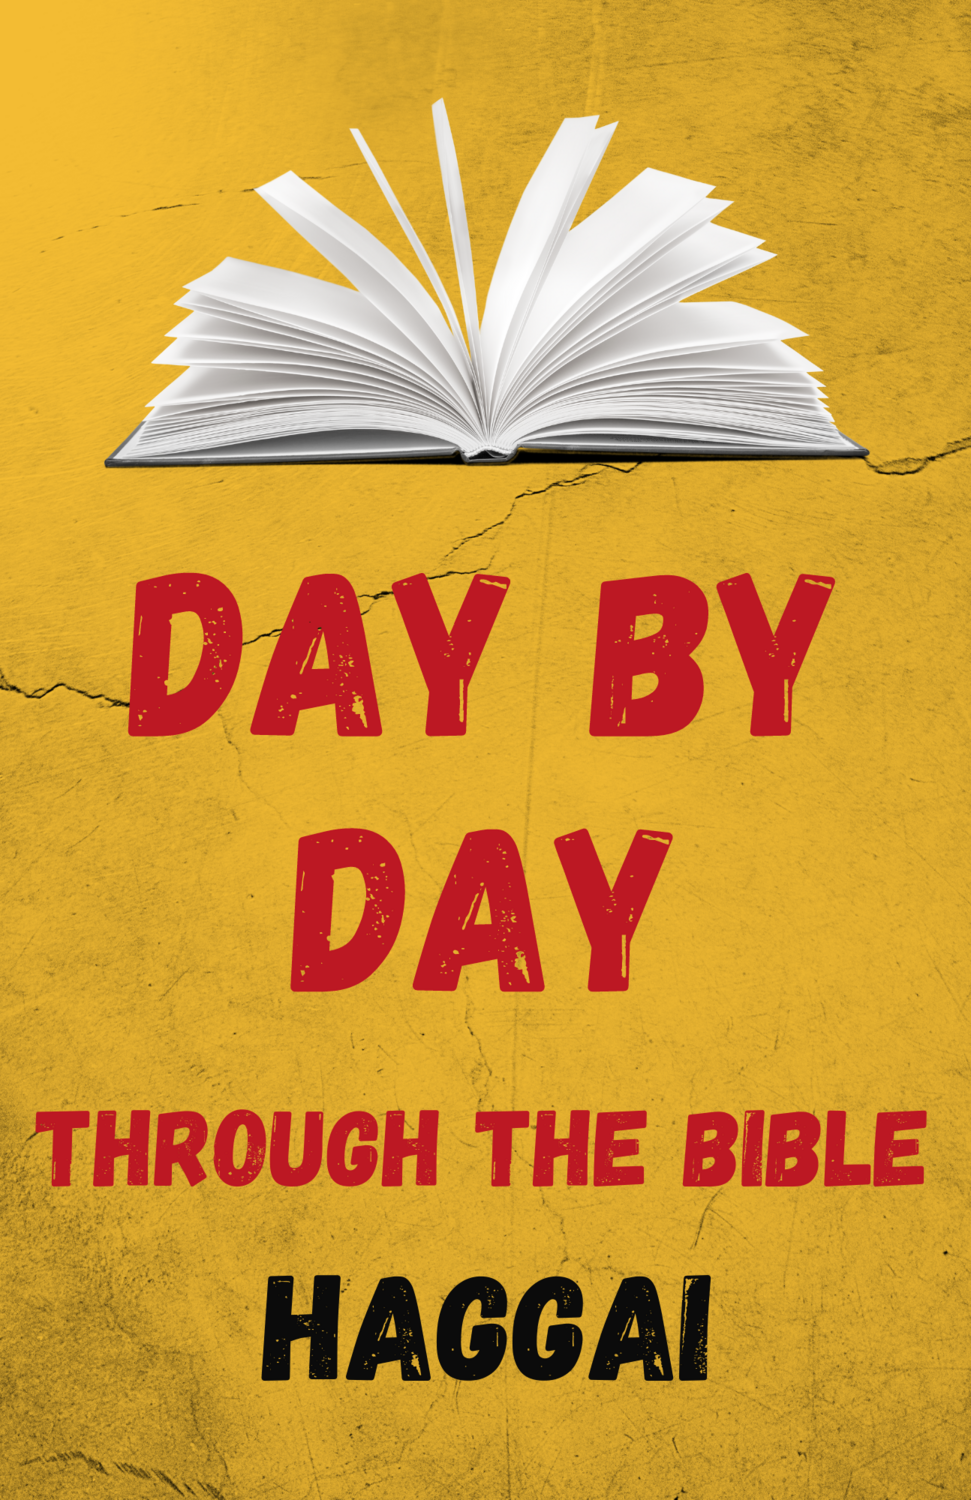 Day by Day Through the Bible: Two Days in Haggai - Digital Download